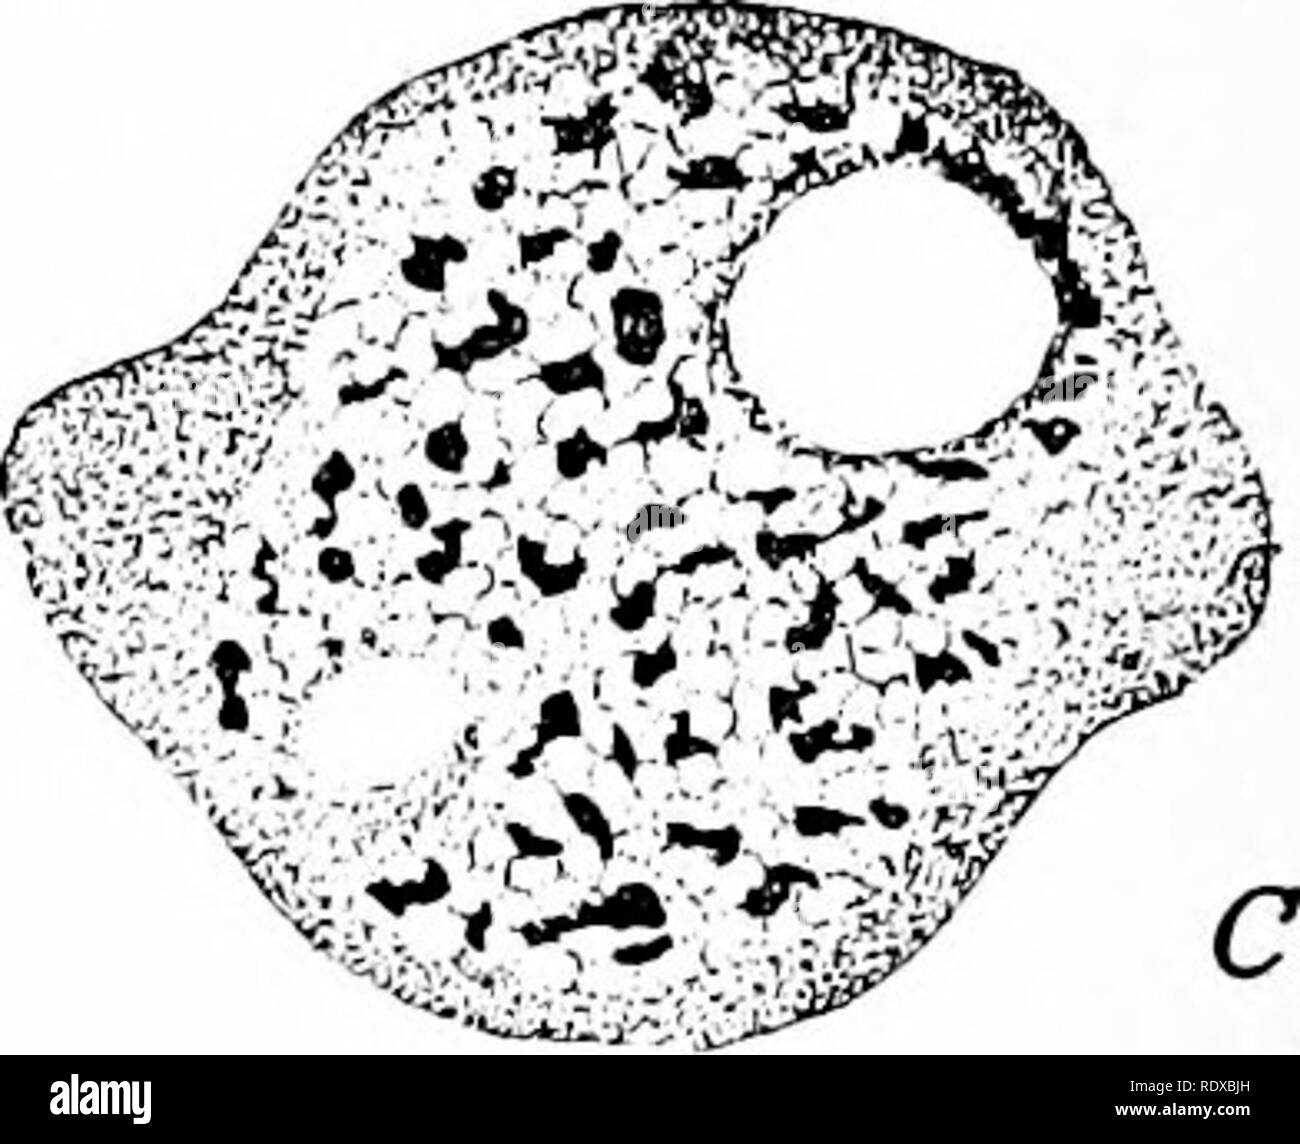 . ProtozooÌlogy. Protozoa; Protozoa, Pathogenic. FERTILIZATION BY AUTOGAMY 141 nuclei, but of masses of idiochromidia which in other protozoa become differentiated into such nuclei. The karyosome and some of the peripheral chromatin form a degenerating &quot;somatic&quot; nucleus which takes no part in the later processes. The further fate of the encysted form thus brought about has not been followed, Ijut in Entameba histolytica, according to the observa- tions of Schaudinn and, later, of Craig ('OS), such a stage is followed by spore formation. Schaudinn ('03) observed, and his observations  Stock Photo